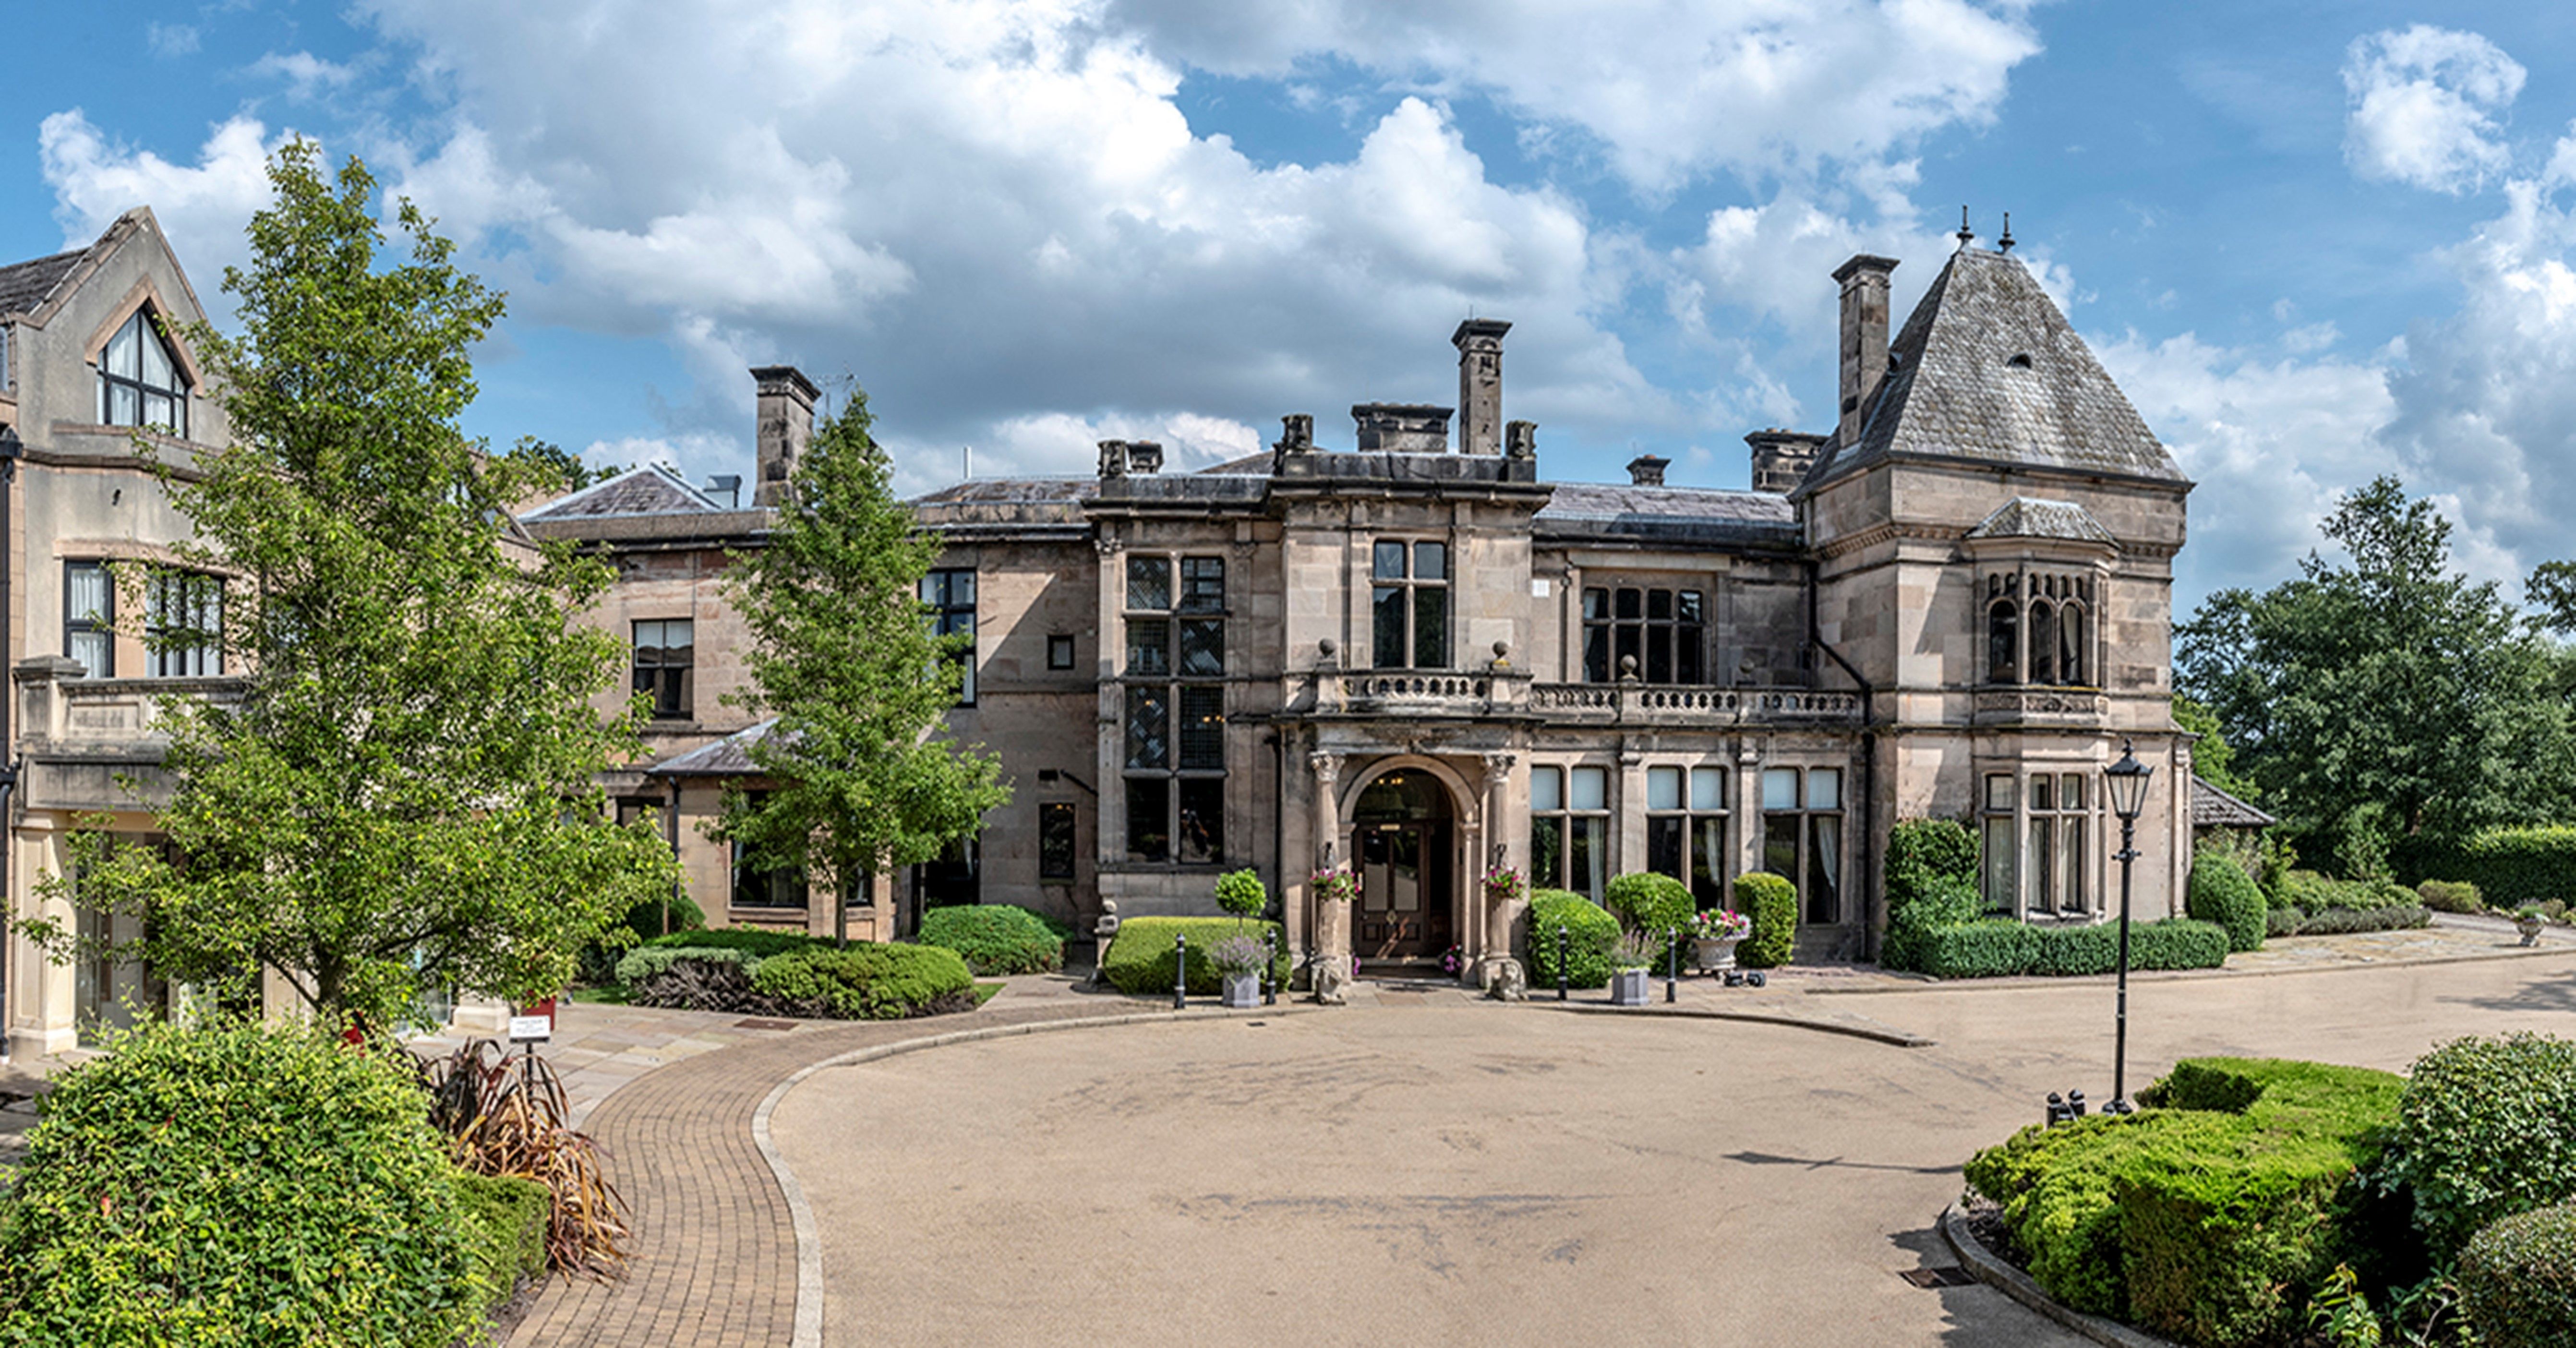 Rookery Hall Hotel’s new General Manager looks ahead at Inspired Meetings and Events proposition for 2023